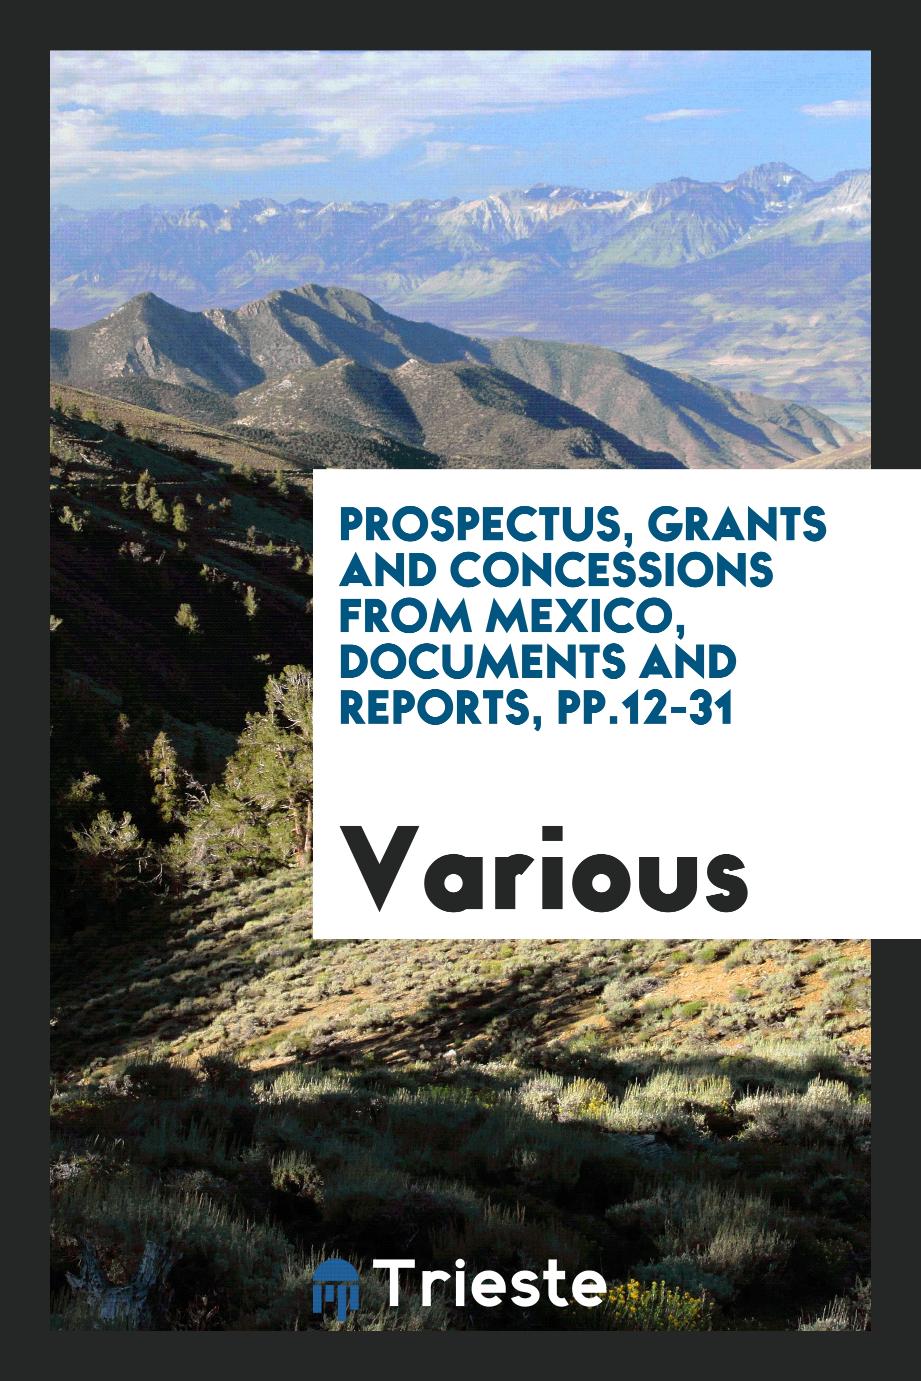 Prospectus, grants and concessions from Mexico, documents and reports, pp.12-31